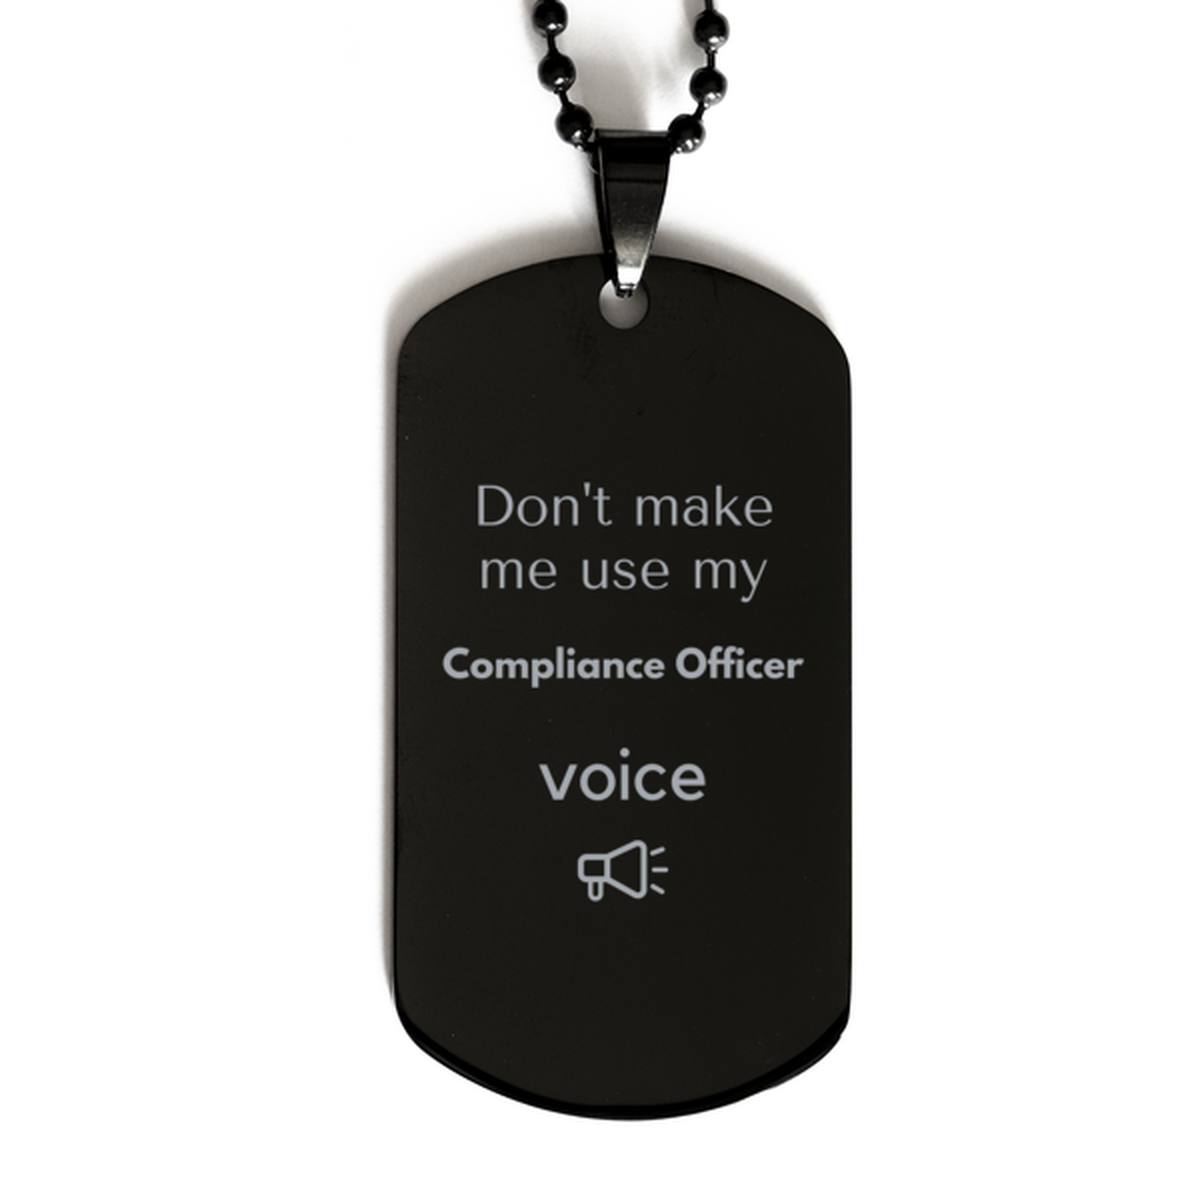 Don't make me use my Compliance Officer voice, Sarcasm Compliance Officer Gifts, Christmas Compliance Officer Black Dog Tag Birthday Unique Gifts For Compliance Officer Coworkers, Men, Women, Colleague, Friends